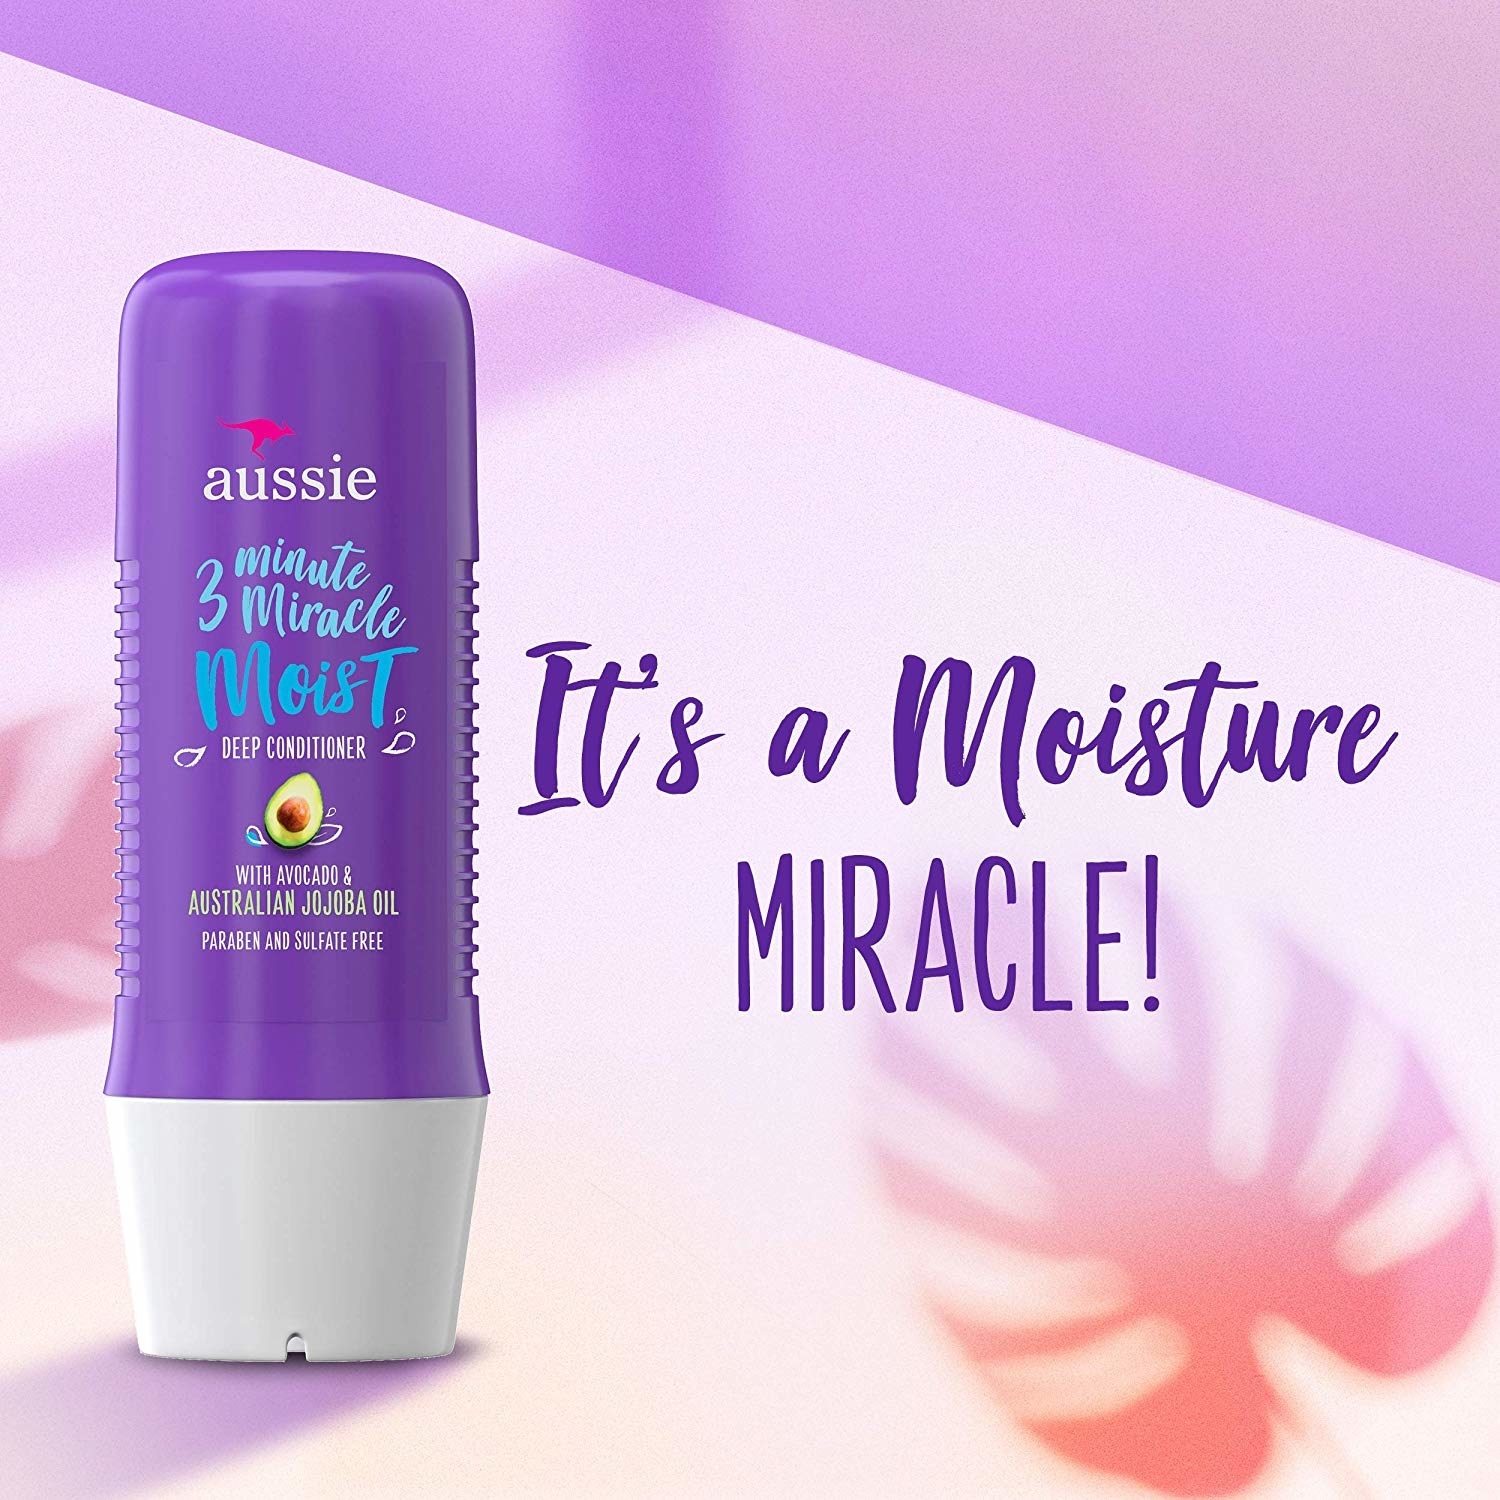 The bottle of conditioner with text &quot;it&#x27;s a moisture miracle!&quot;